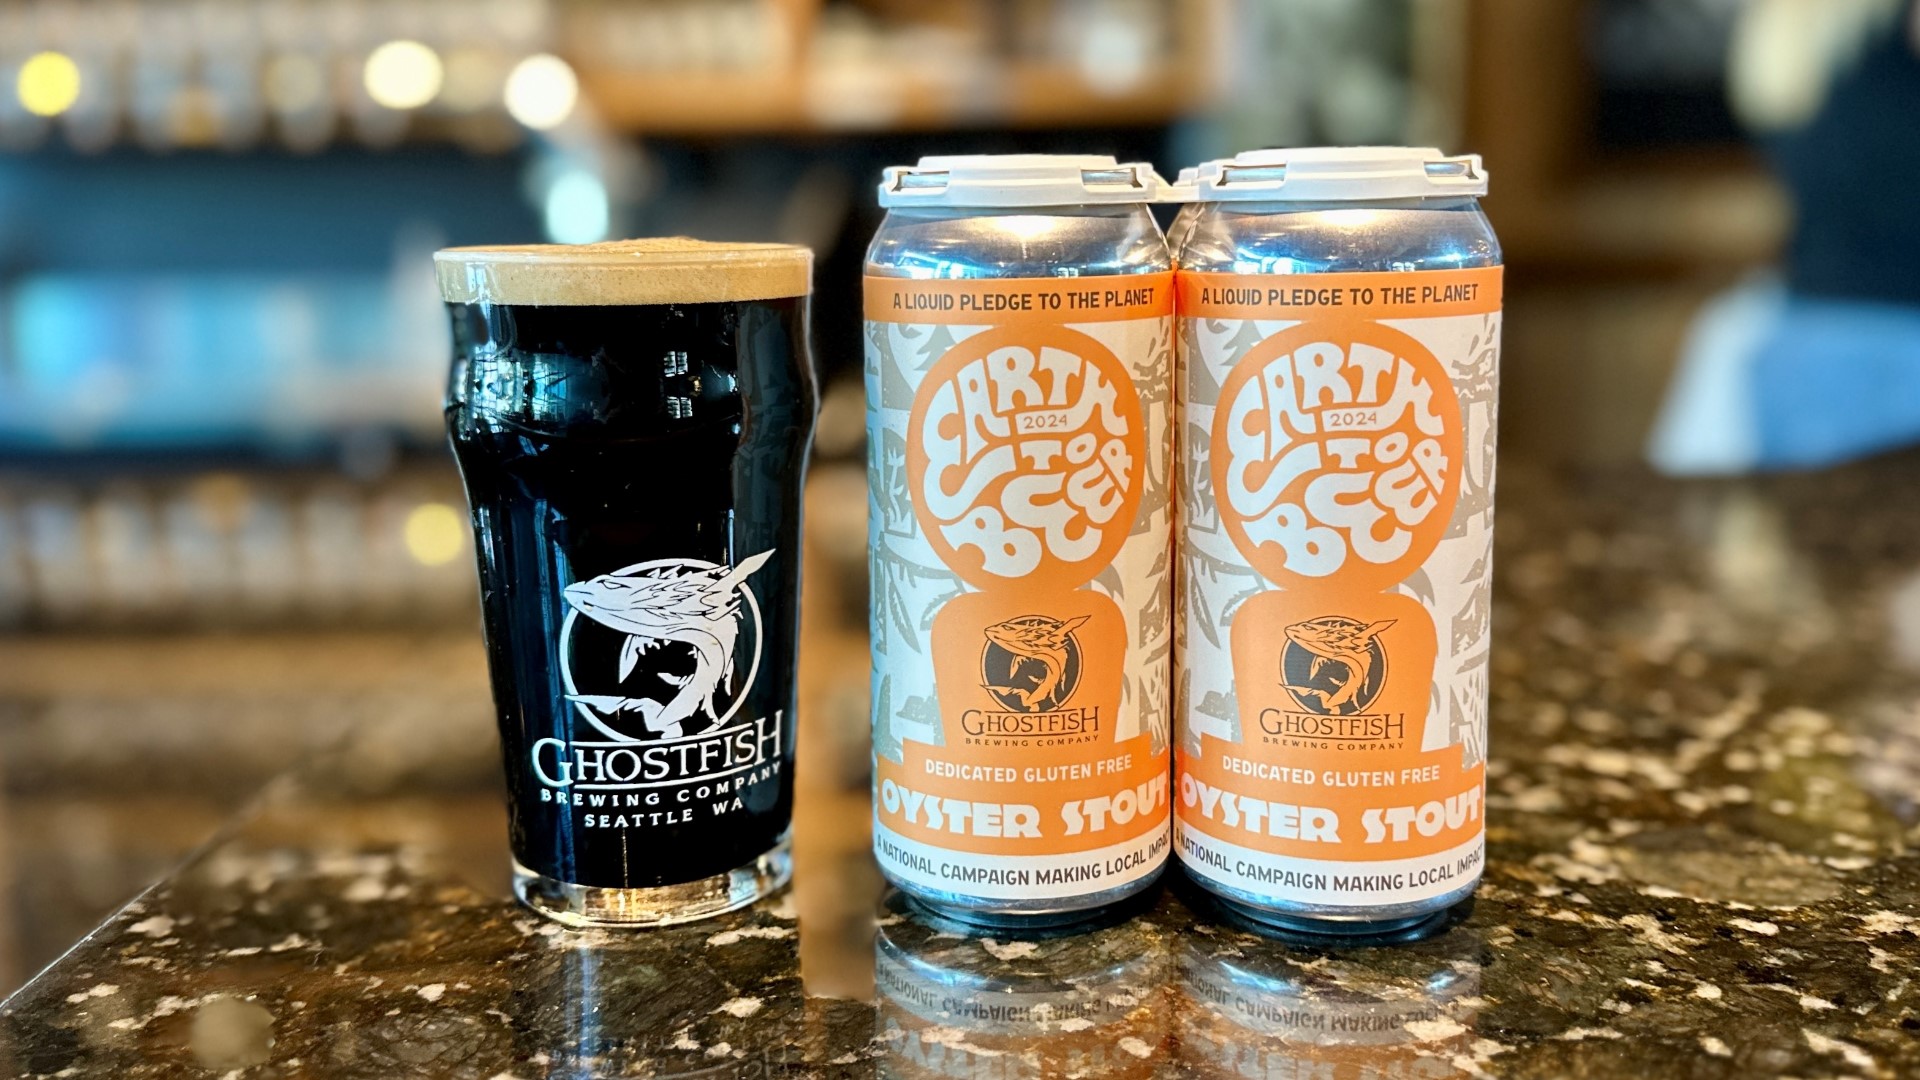 Ghostfish Brewing created a limited-edition Oyster Stout to raise money for the Puget Sound Restoration Fund. #k5evening